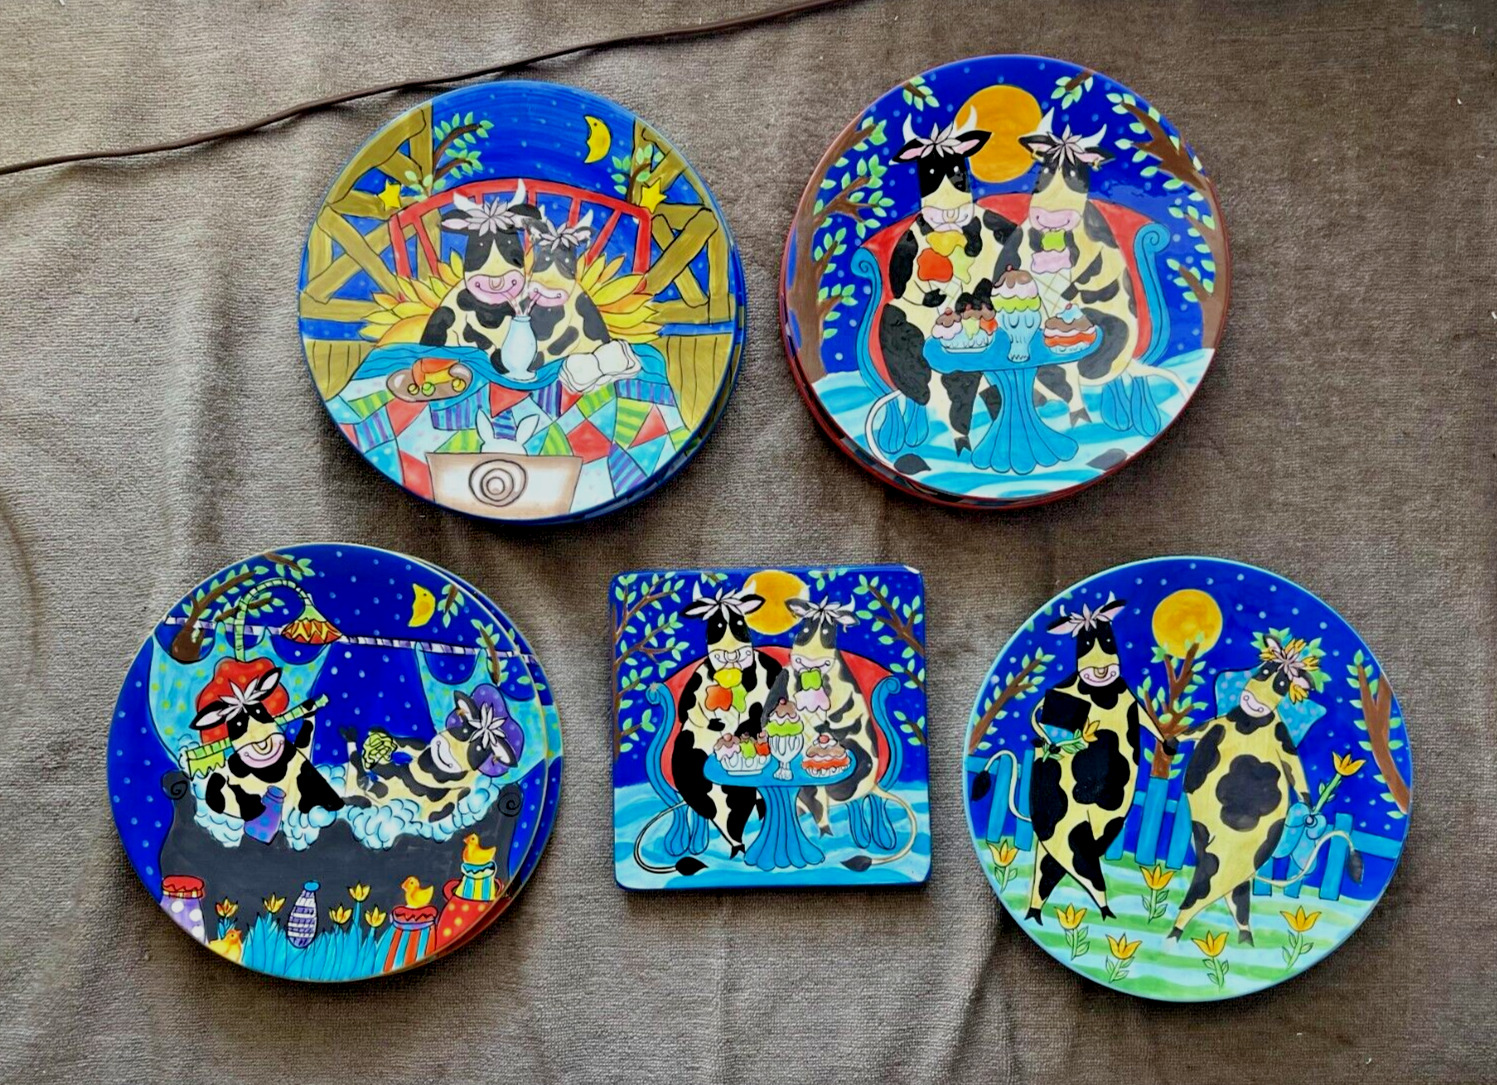 Vintage 8 WOOLY DREAMS DESIGN 2002 LULA CHANG COW PLATES and 2 Trivets - Rare